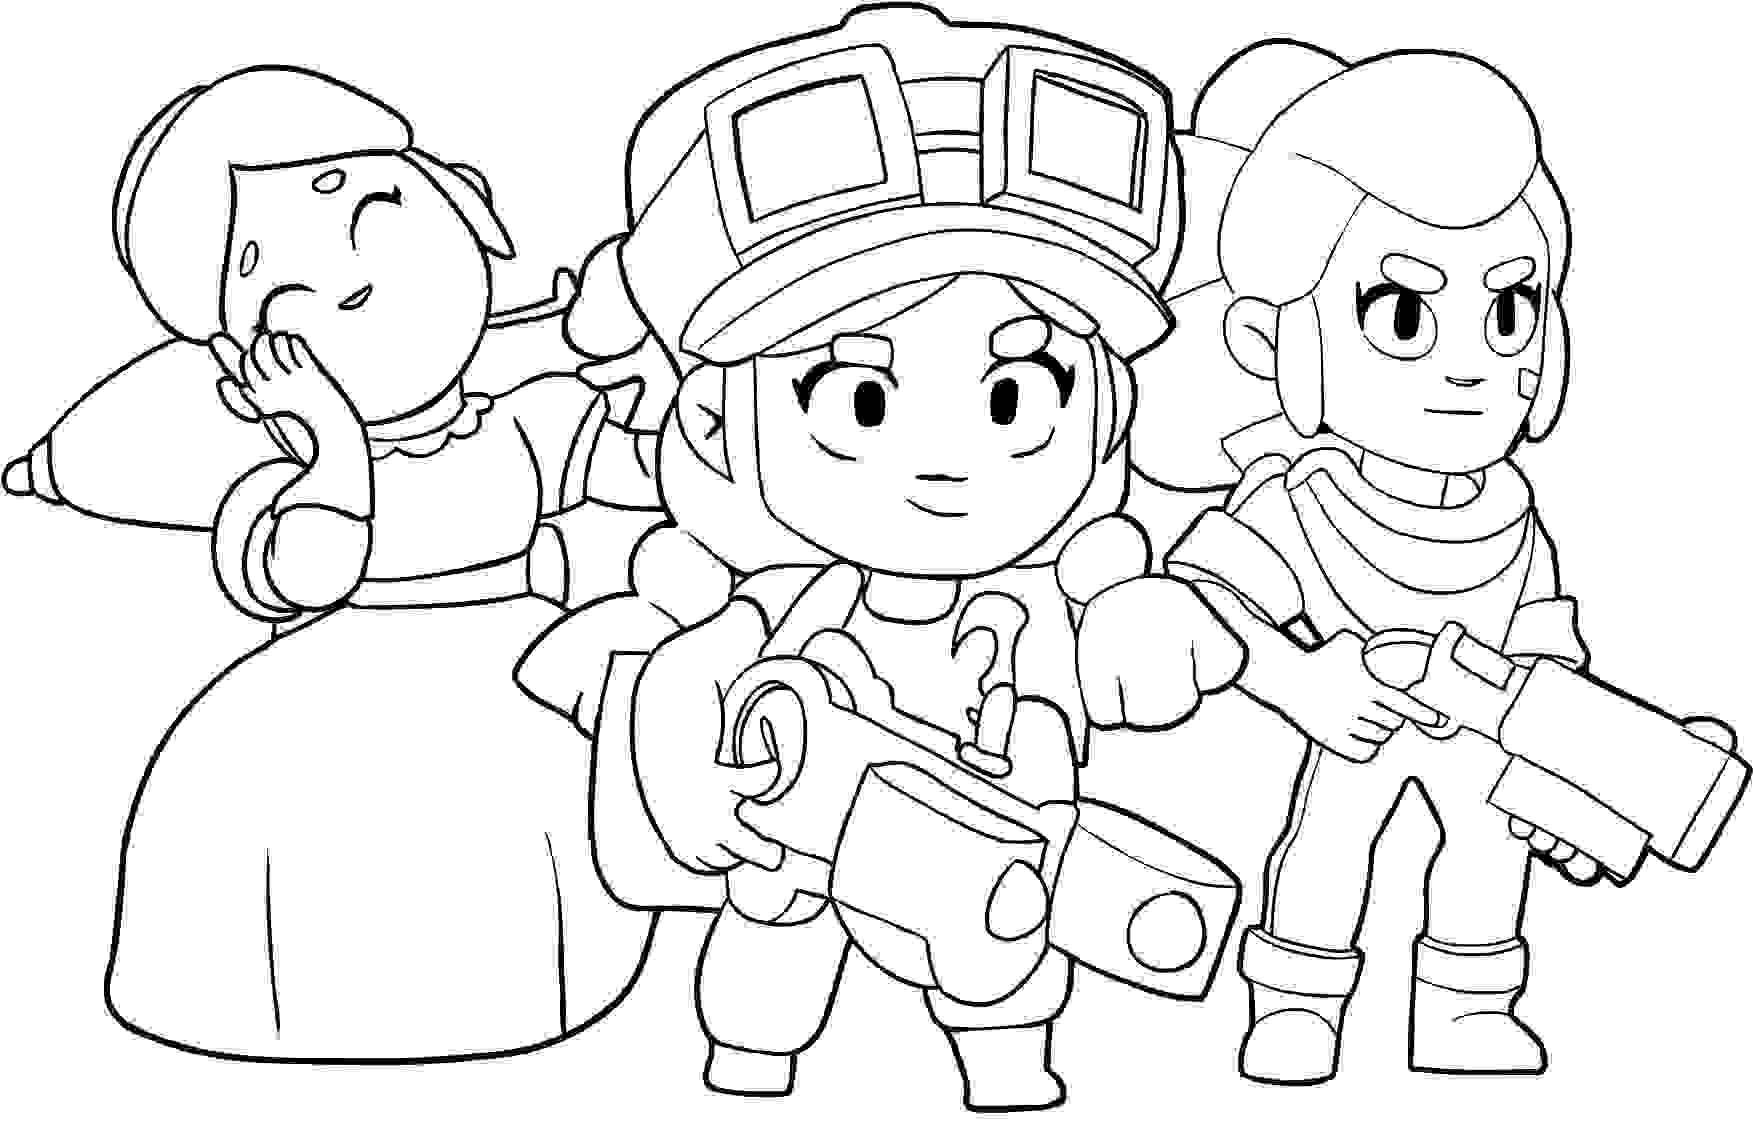 Team of Jessie, Shelly and Piper from Brawl Stars Coloring Page